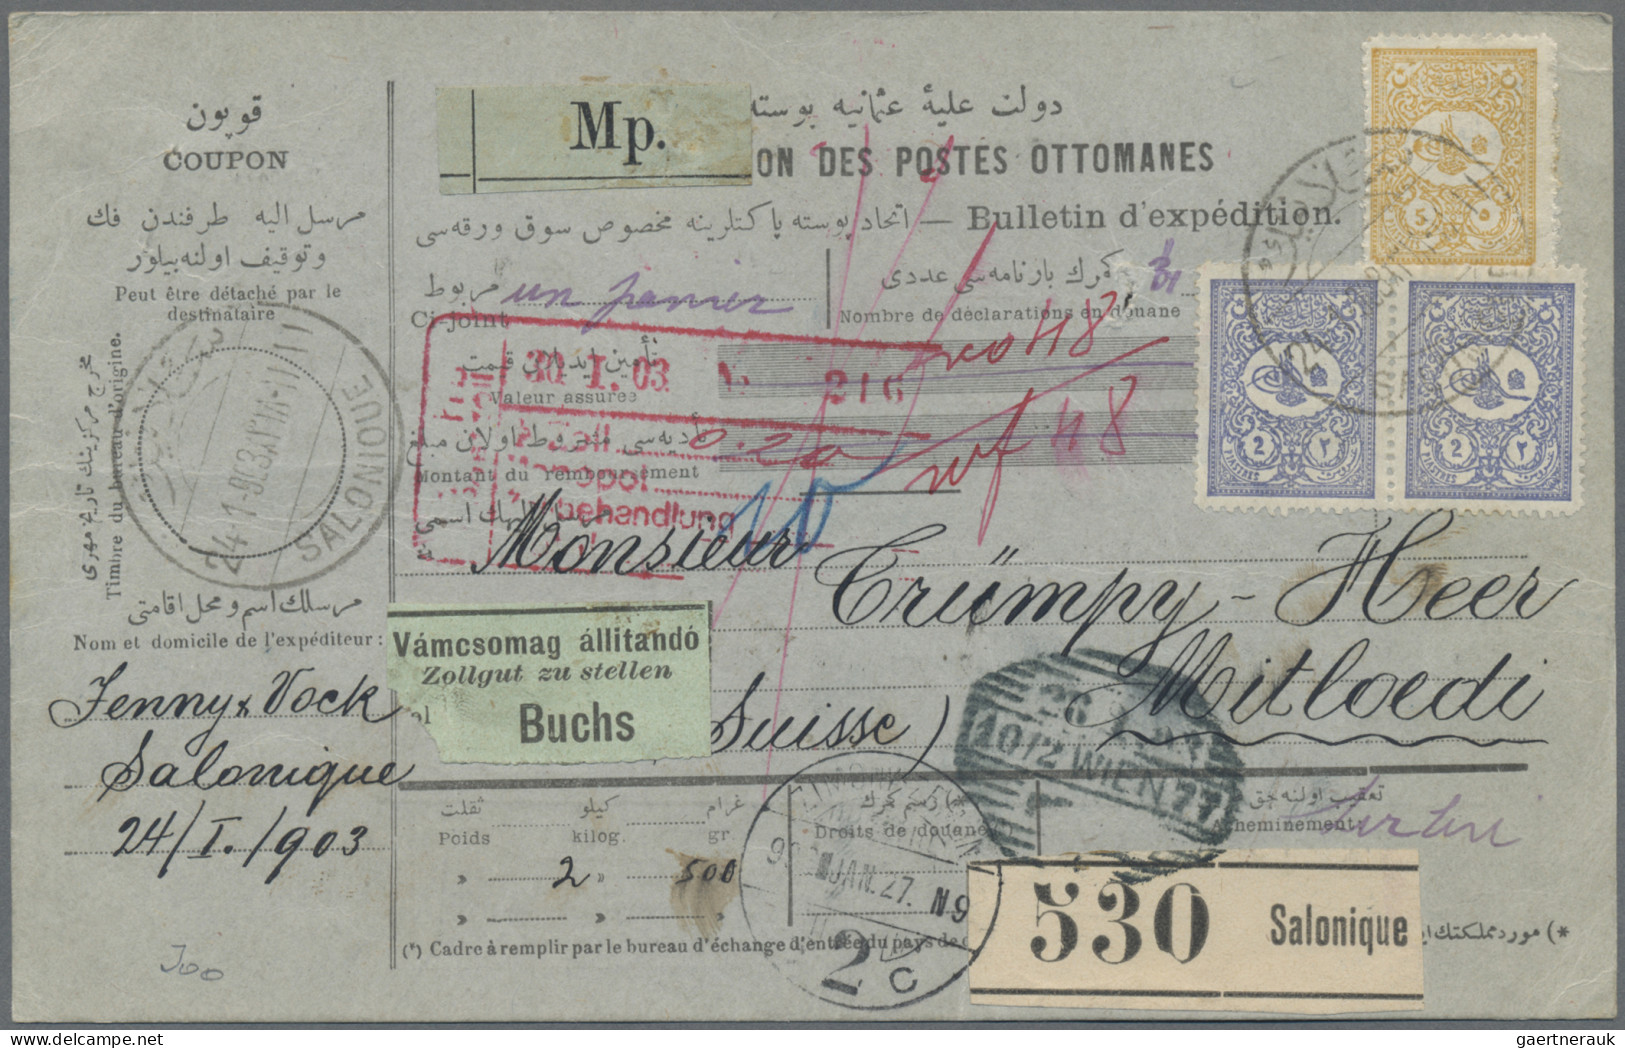 Turkey: 1903 Parcel Card Used From Salonique To Mitloedi, Switzerland Via Vienna - Covers & Documents